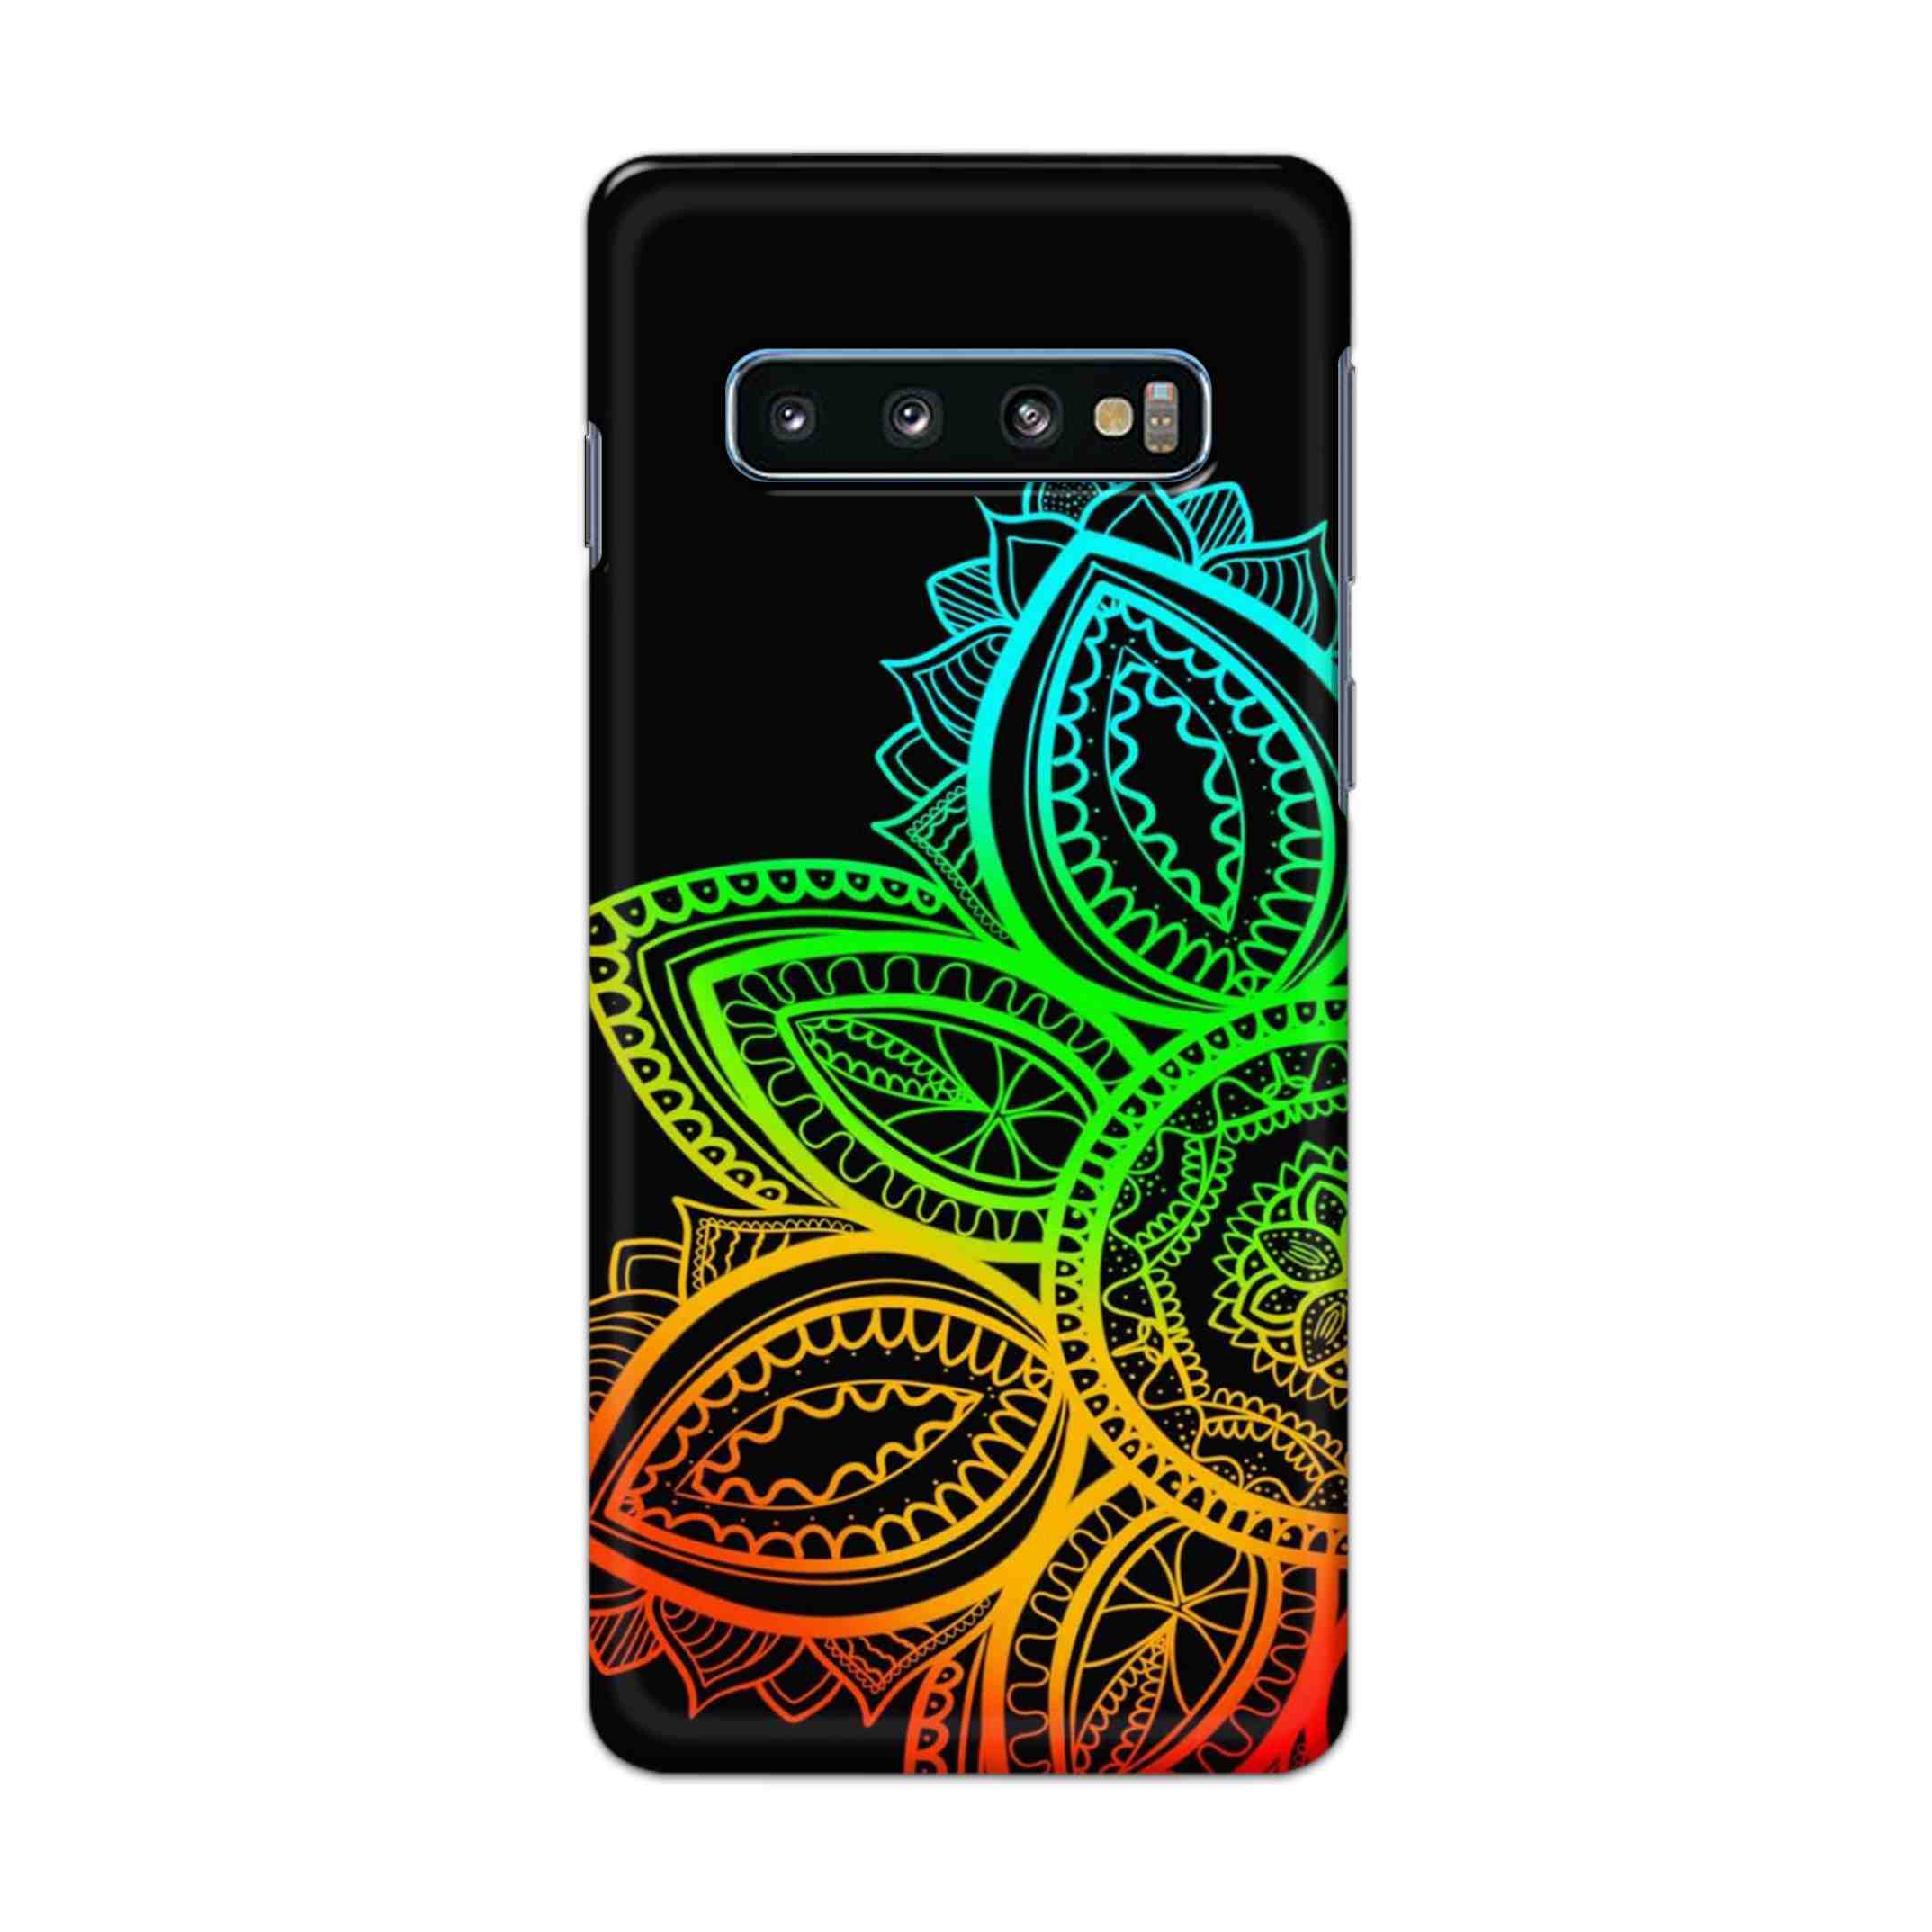 Buy Neon Mandala Hard Back Mobile Phone Case Cover For Samsung Galaxy S10 Plus Online